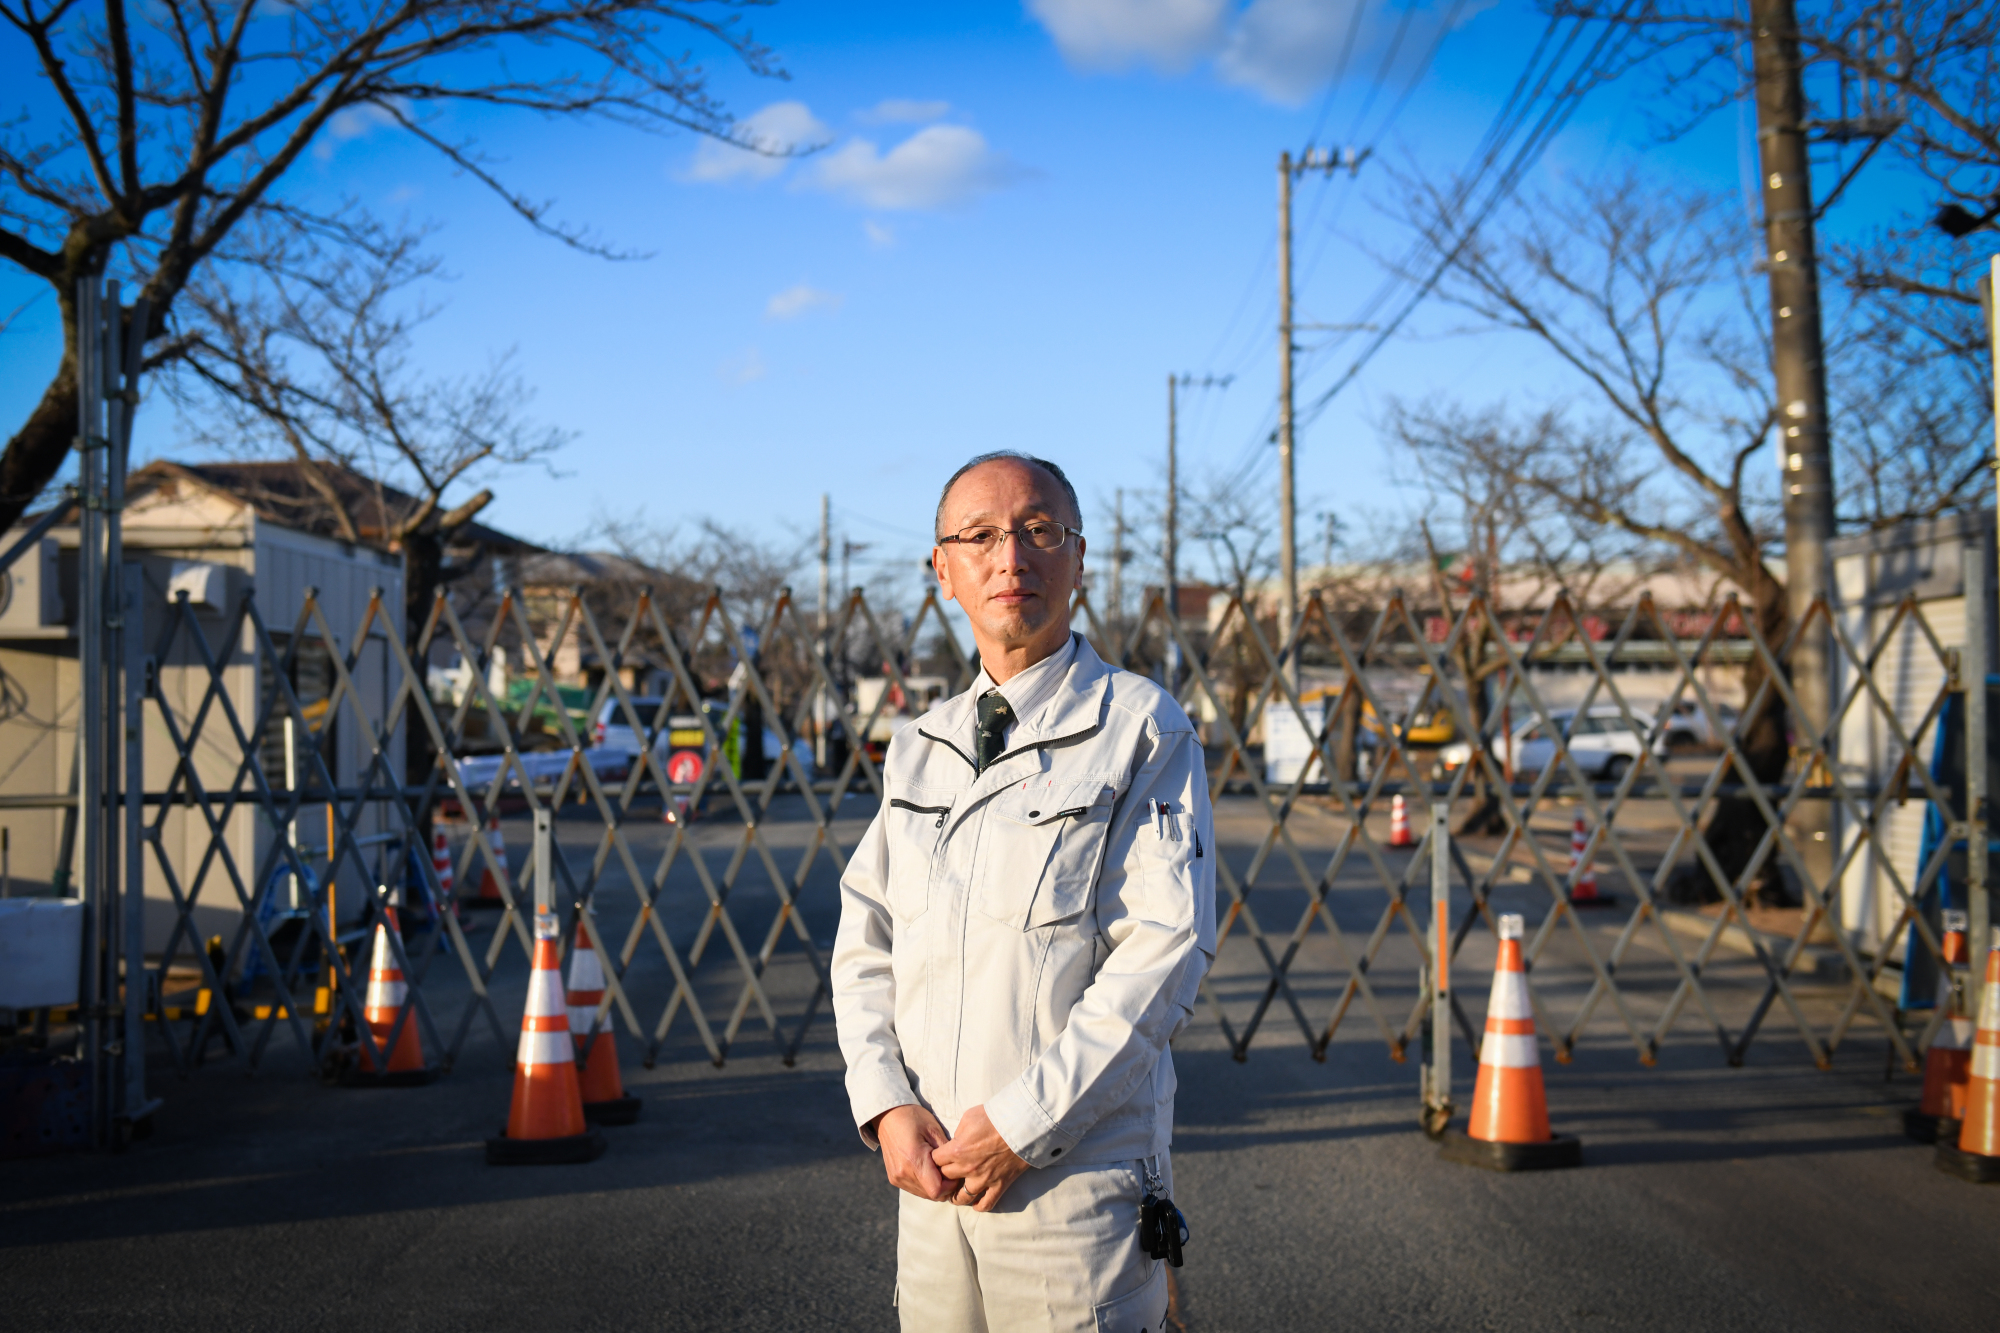 Kiyonori Watanabe, director of Fukushima Electric Power Co., posing outside the 'difficult-to-return' zone in the Yonomori neighborhood of Tomioka, Fukushima Prefecture, says he hopes the region's solar farms will all be taken over by residents, luring additional families home. | BLOOMBERG